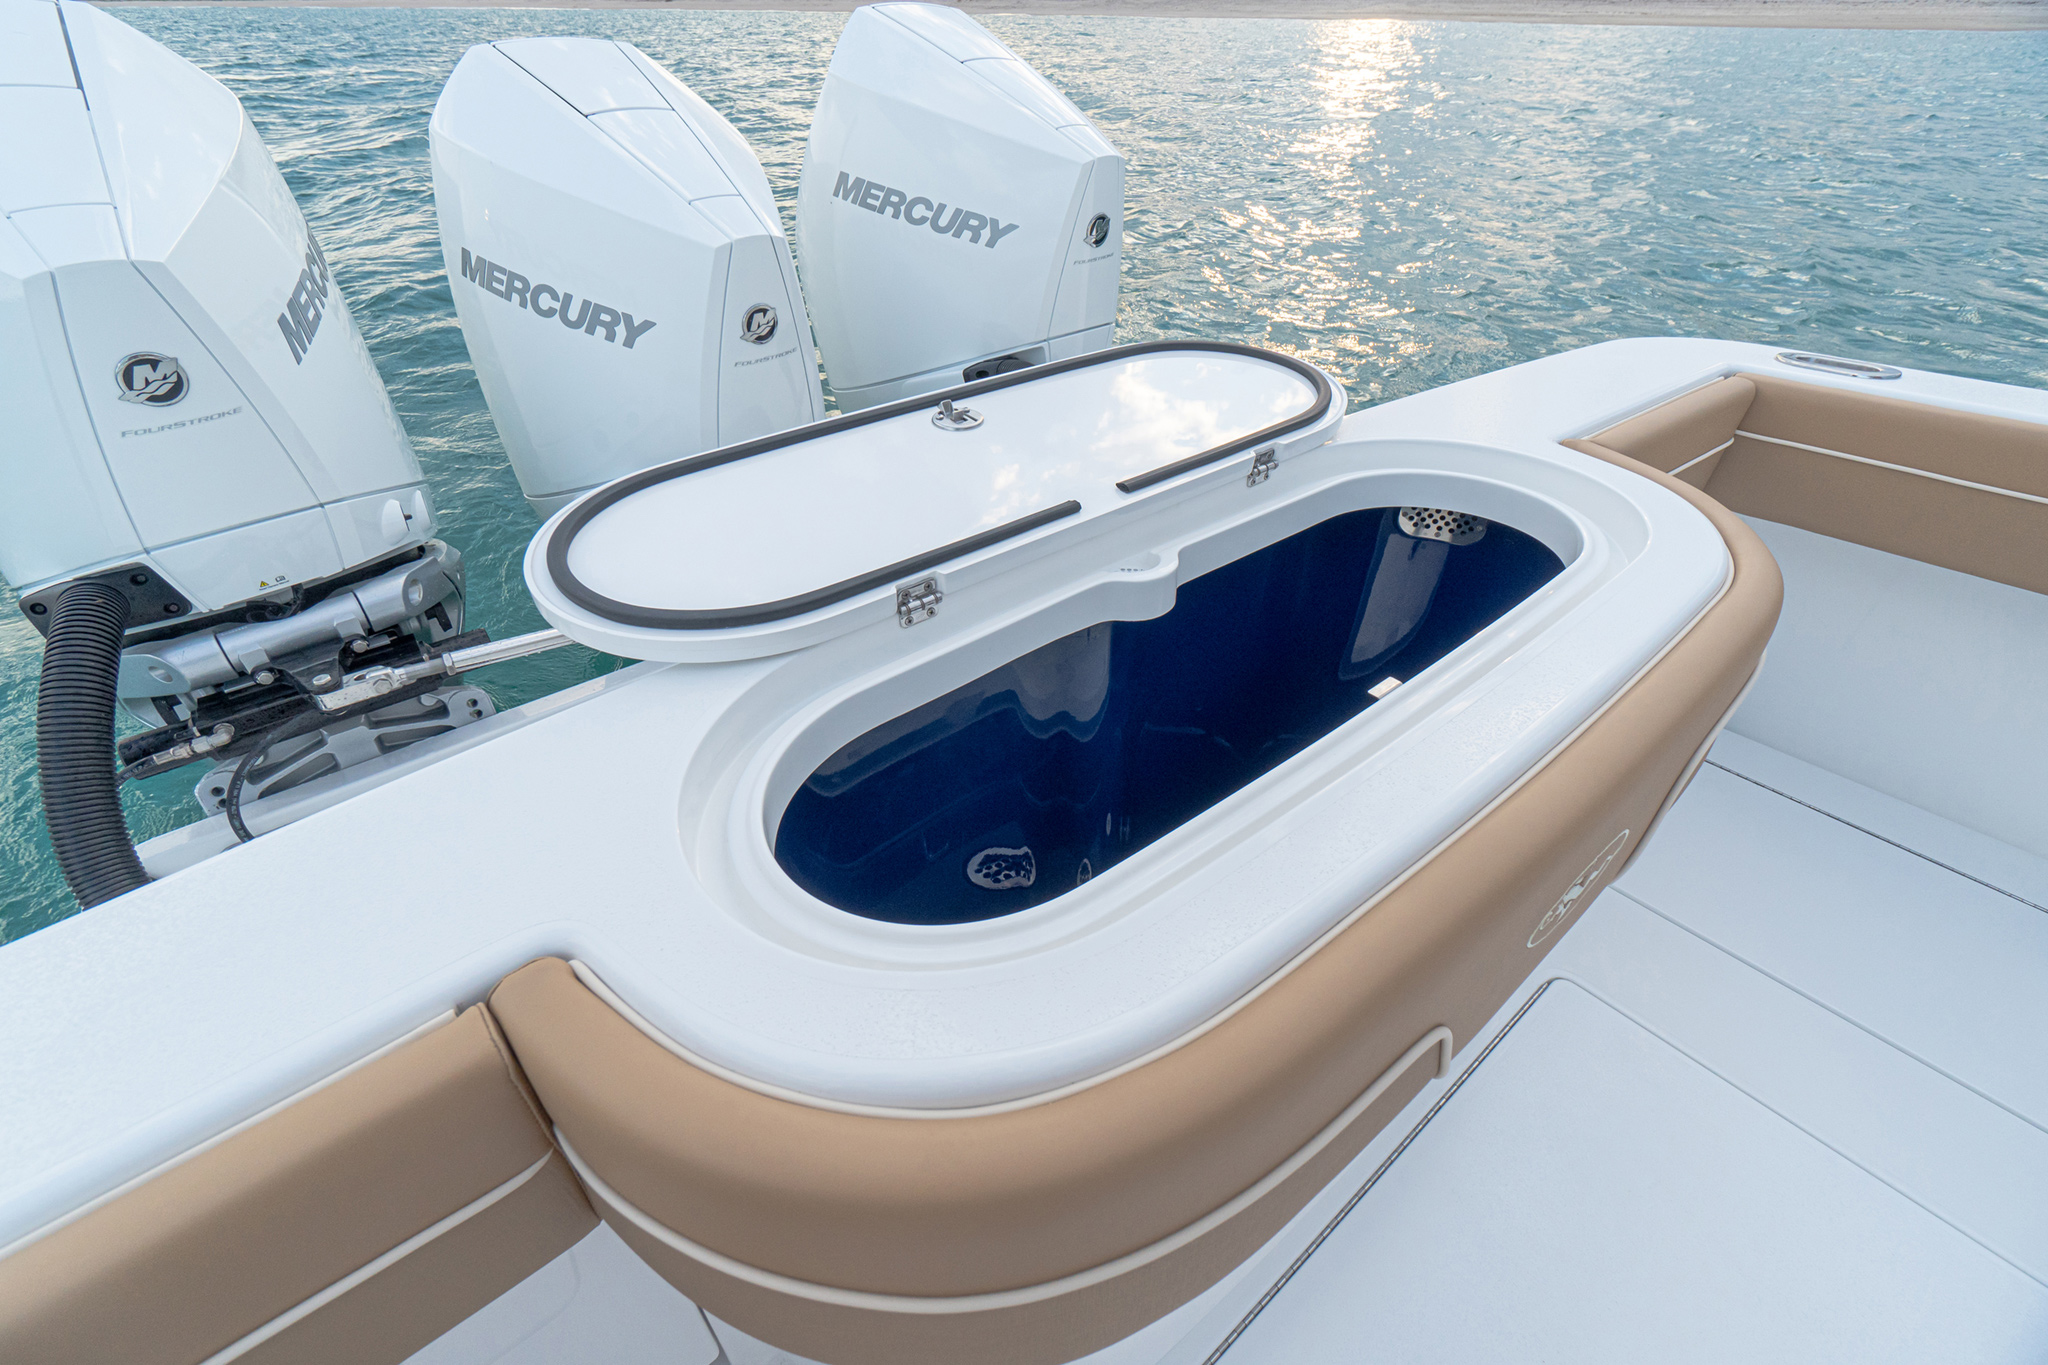 Transom live well (56 gals.) with friction stainless hinges, available Aristo blue interior.